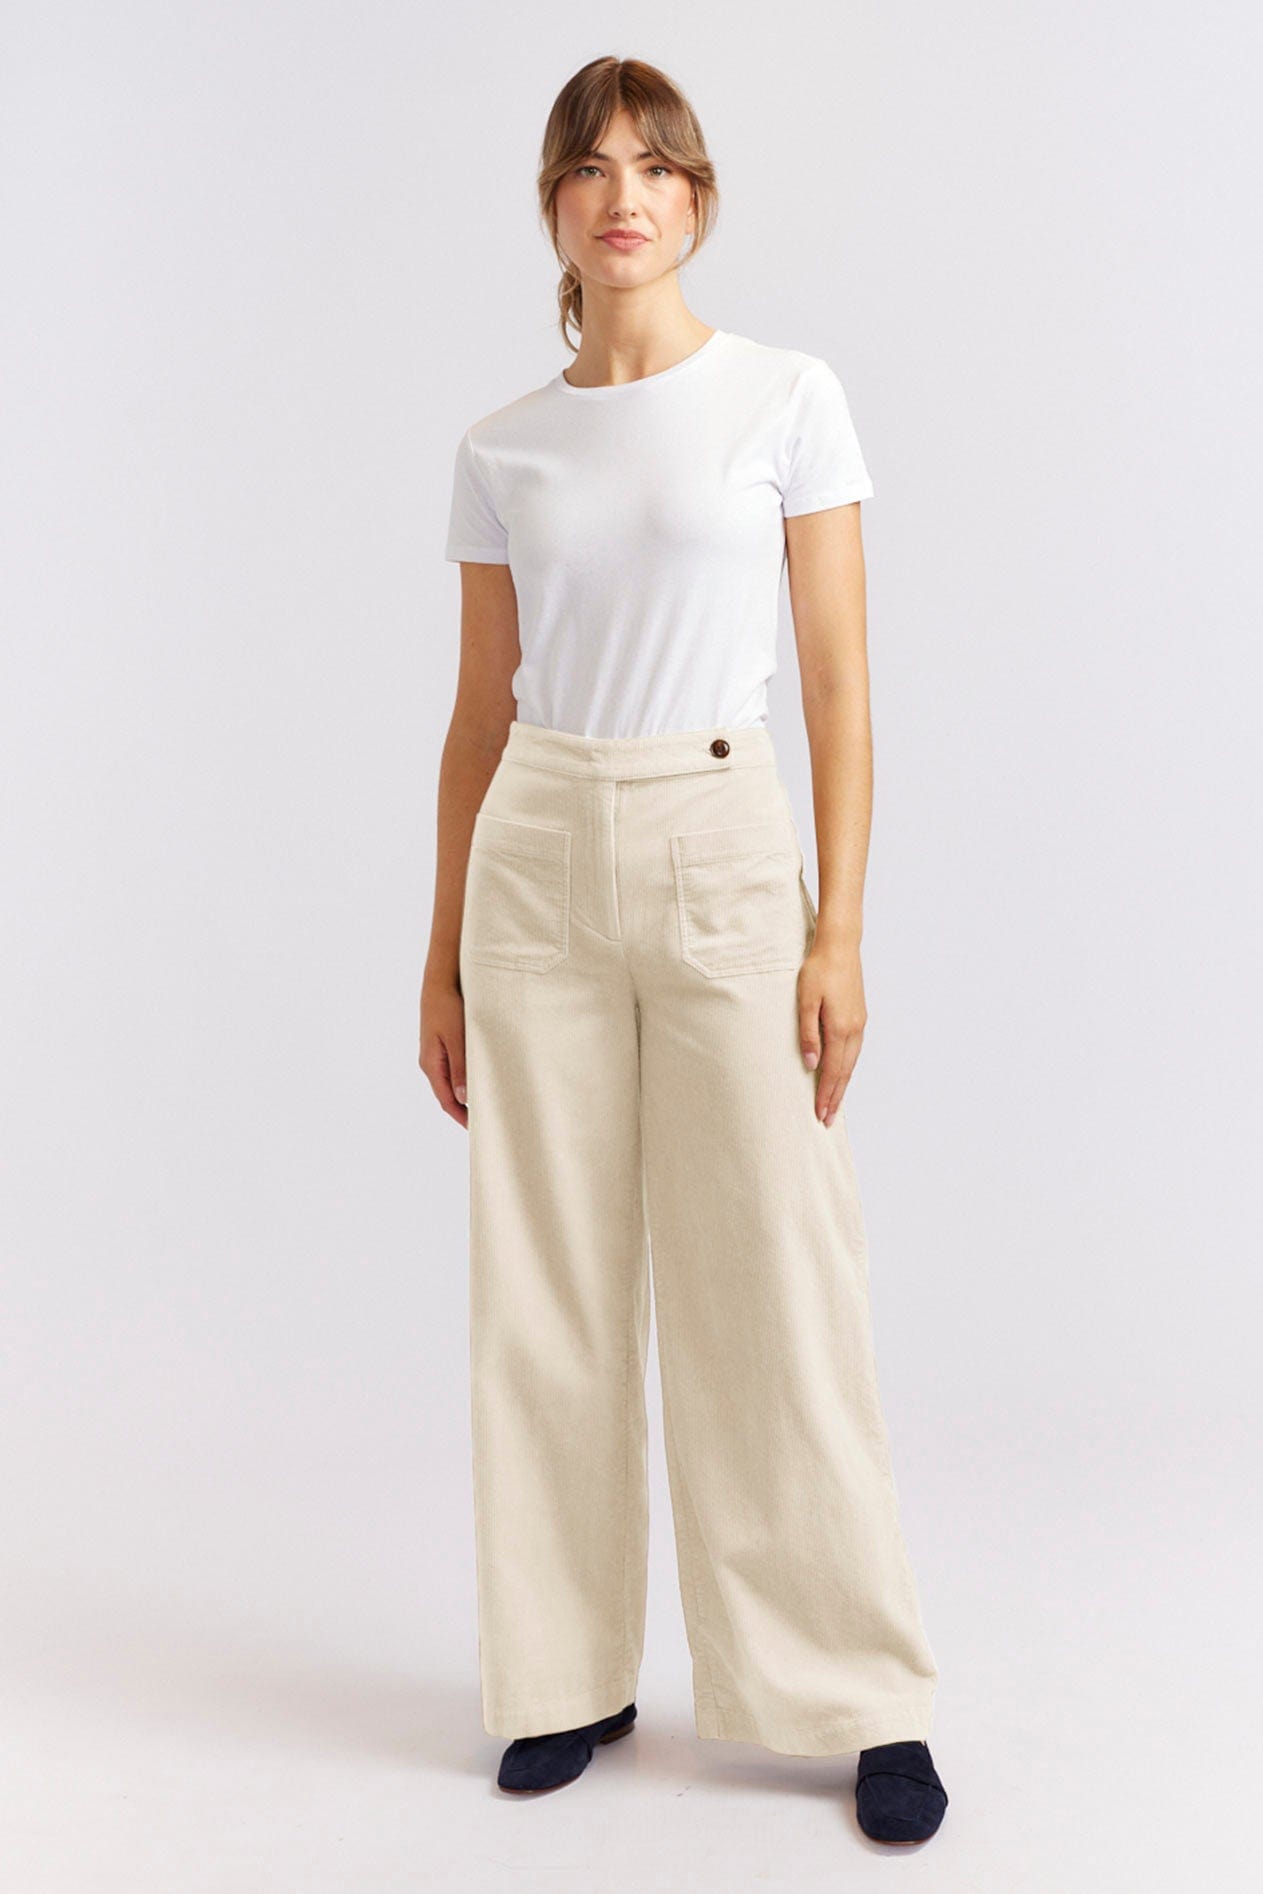 And other stories  cotton stretch corduroy trousers in off white  CREAM   ShopStyle